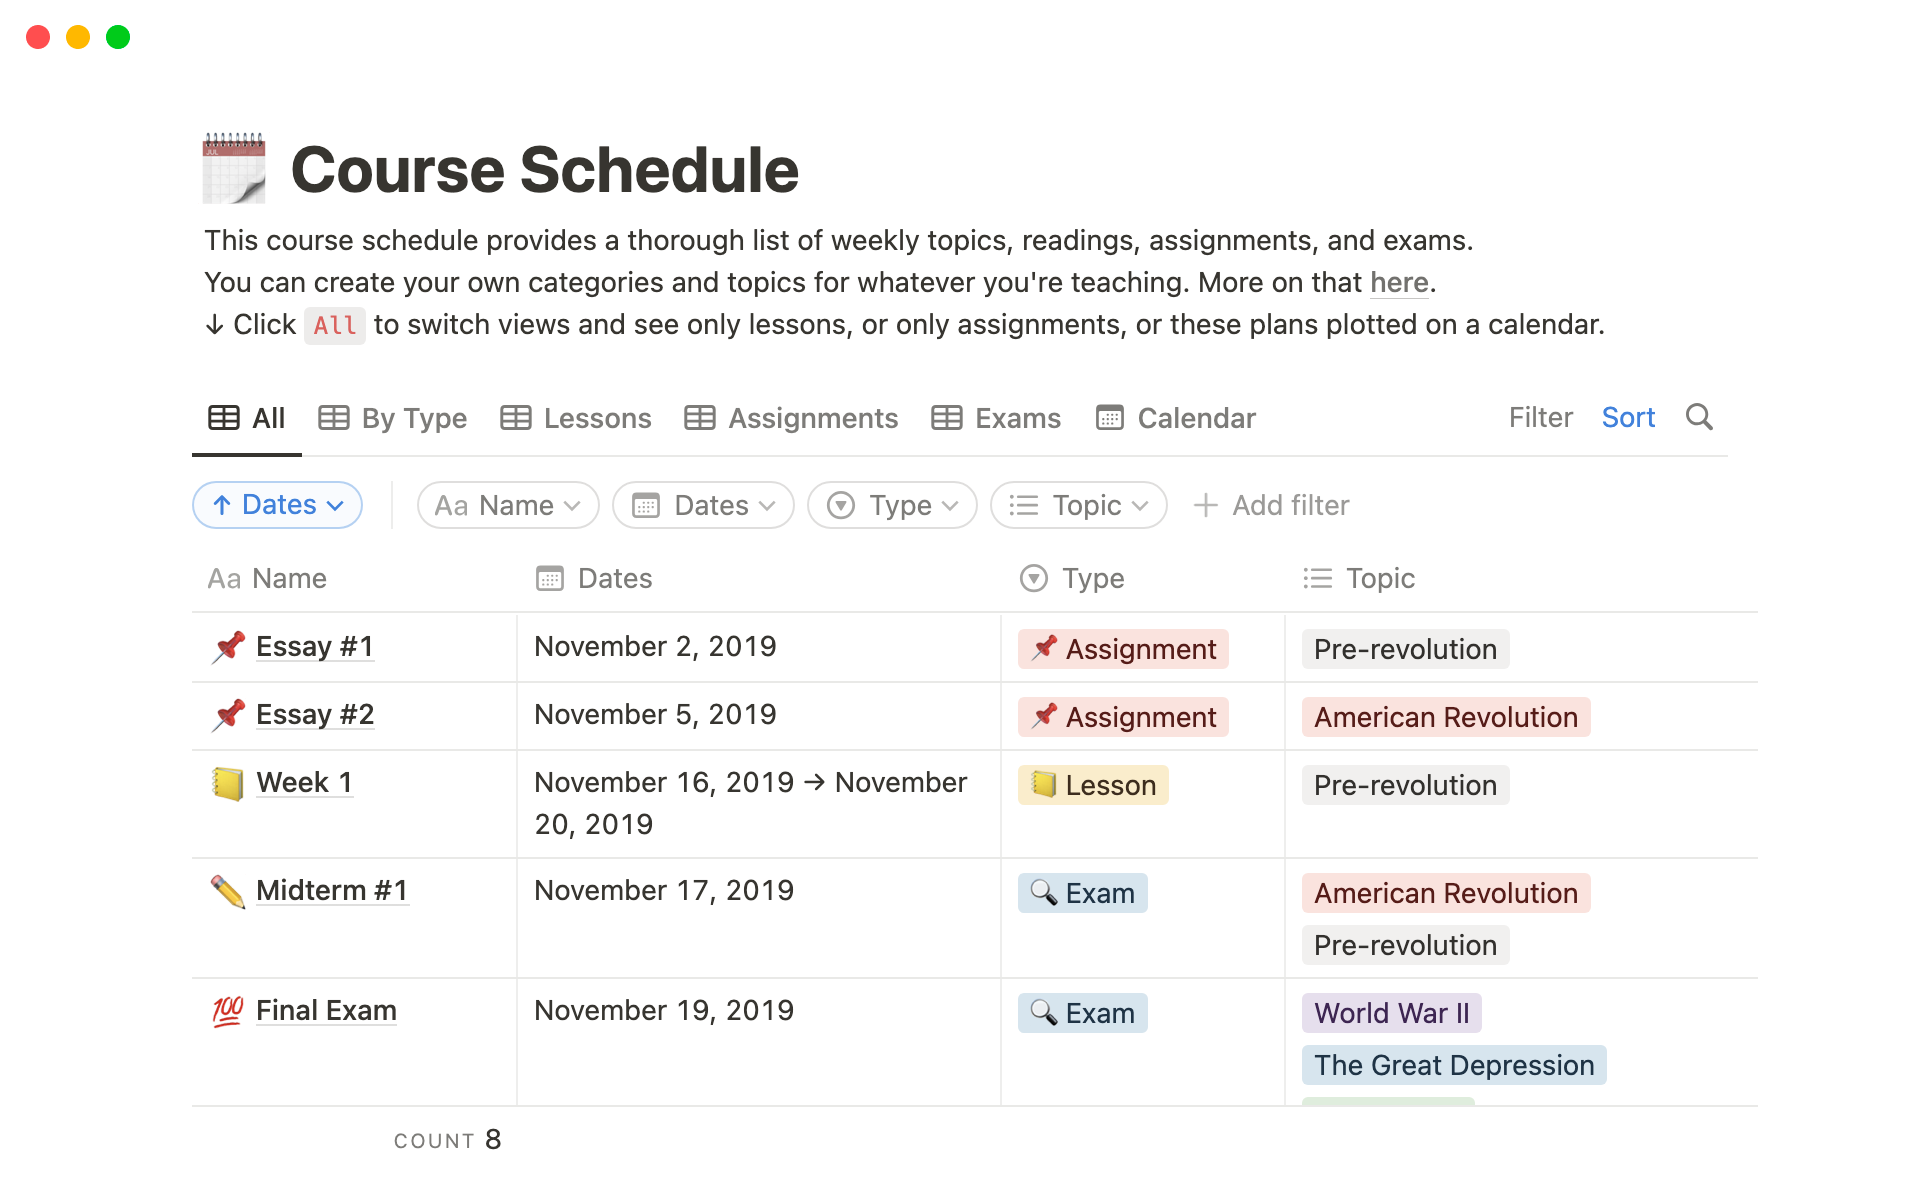 This course schedule provides a comprehensive list of weekly topics, readings, assignments, and exams.